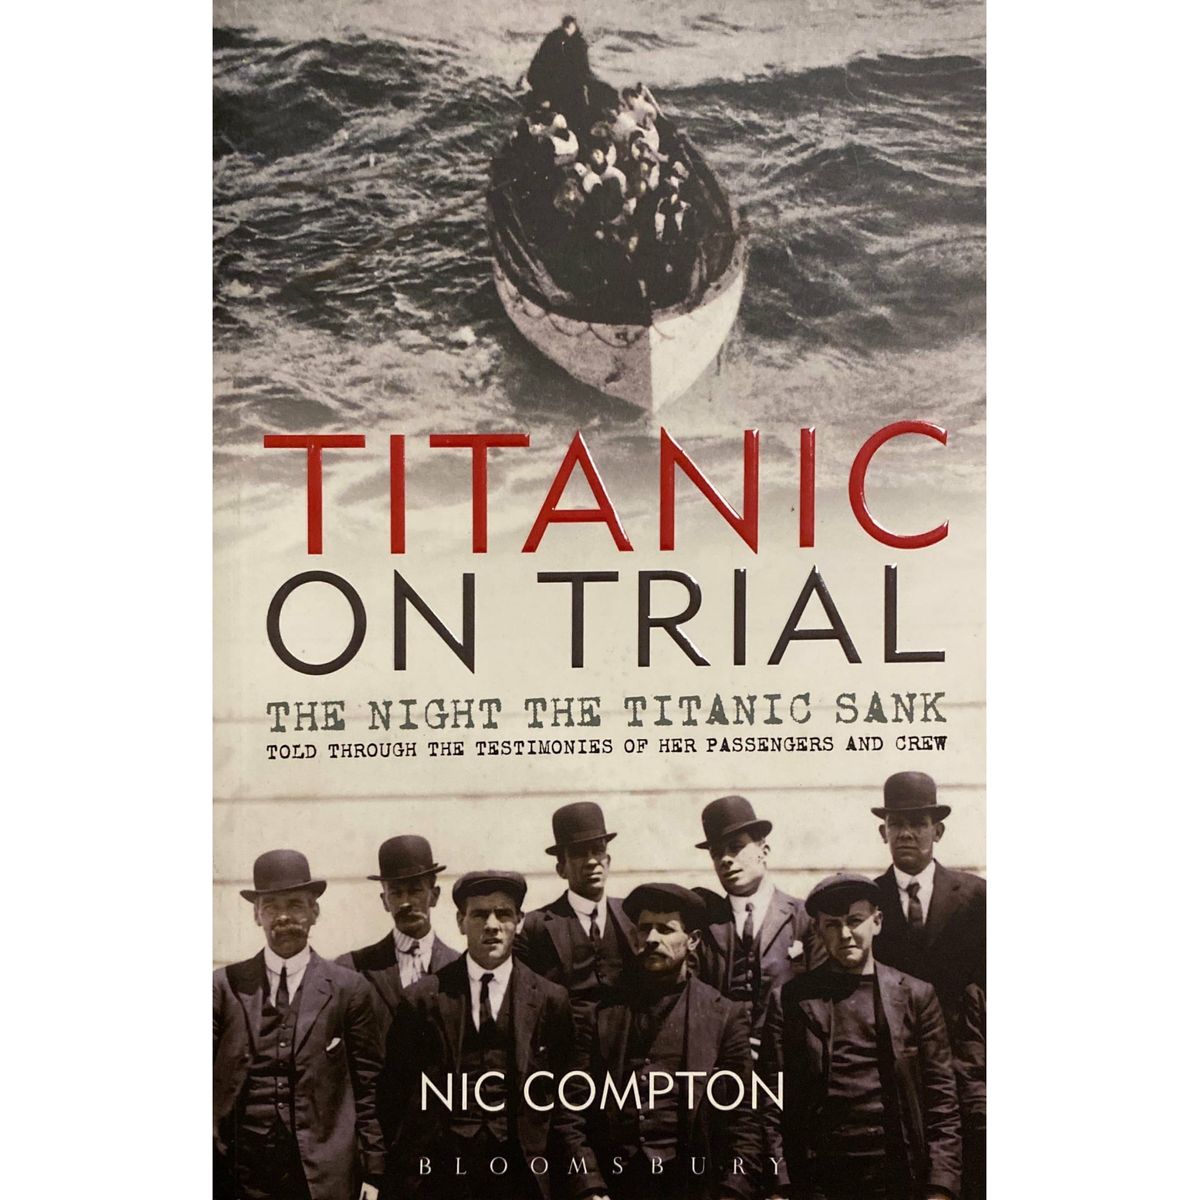 ISBN: 9781408140284 / 1408140284 - Titanic on Trial by Nic Compton [2012]